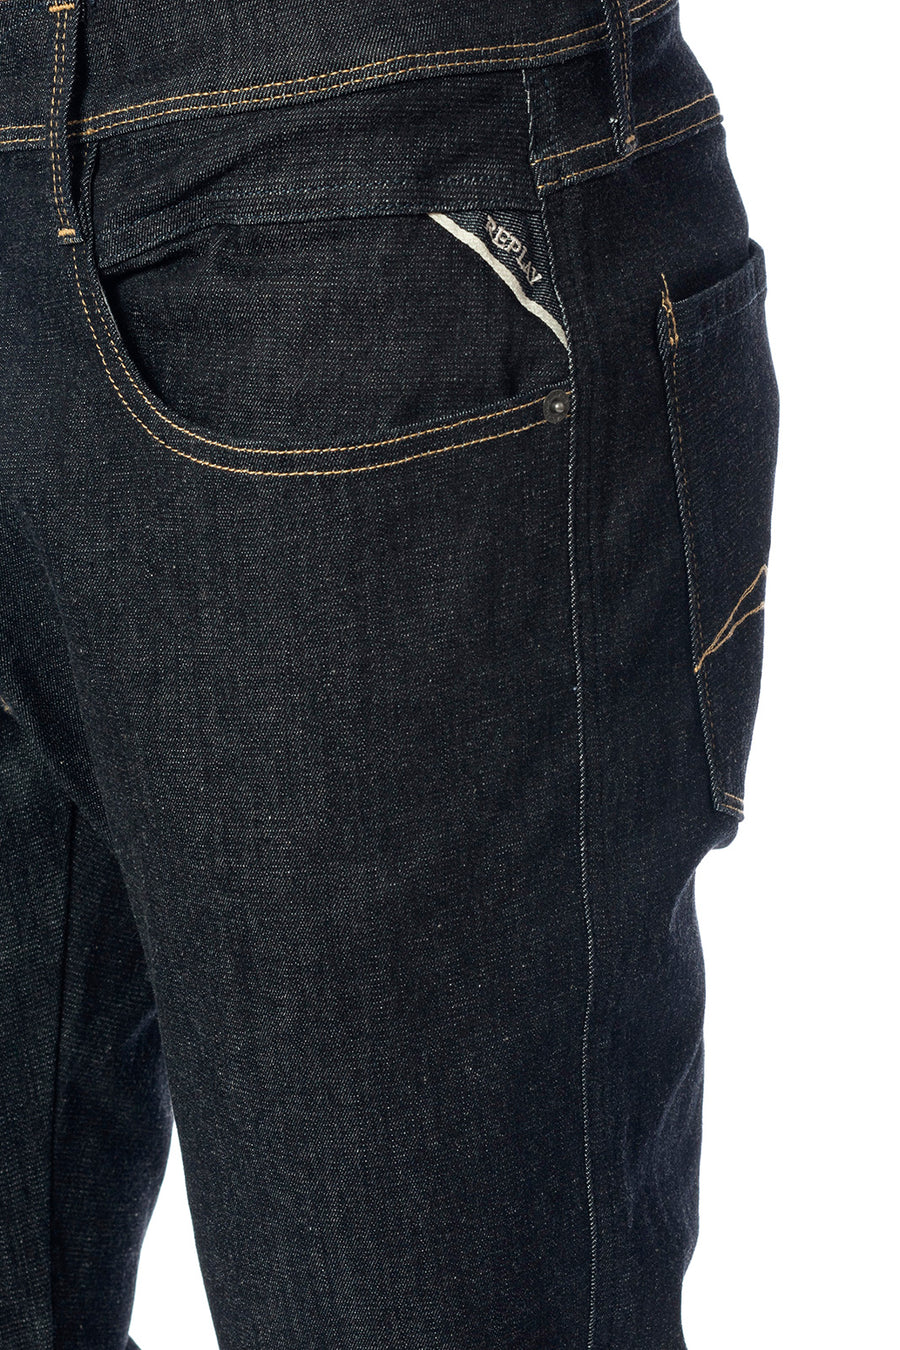 JEANS REPLAY M914Y .000.661 FI3 ANBASS